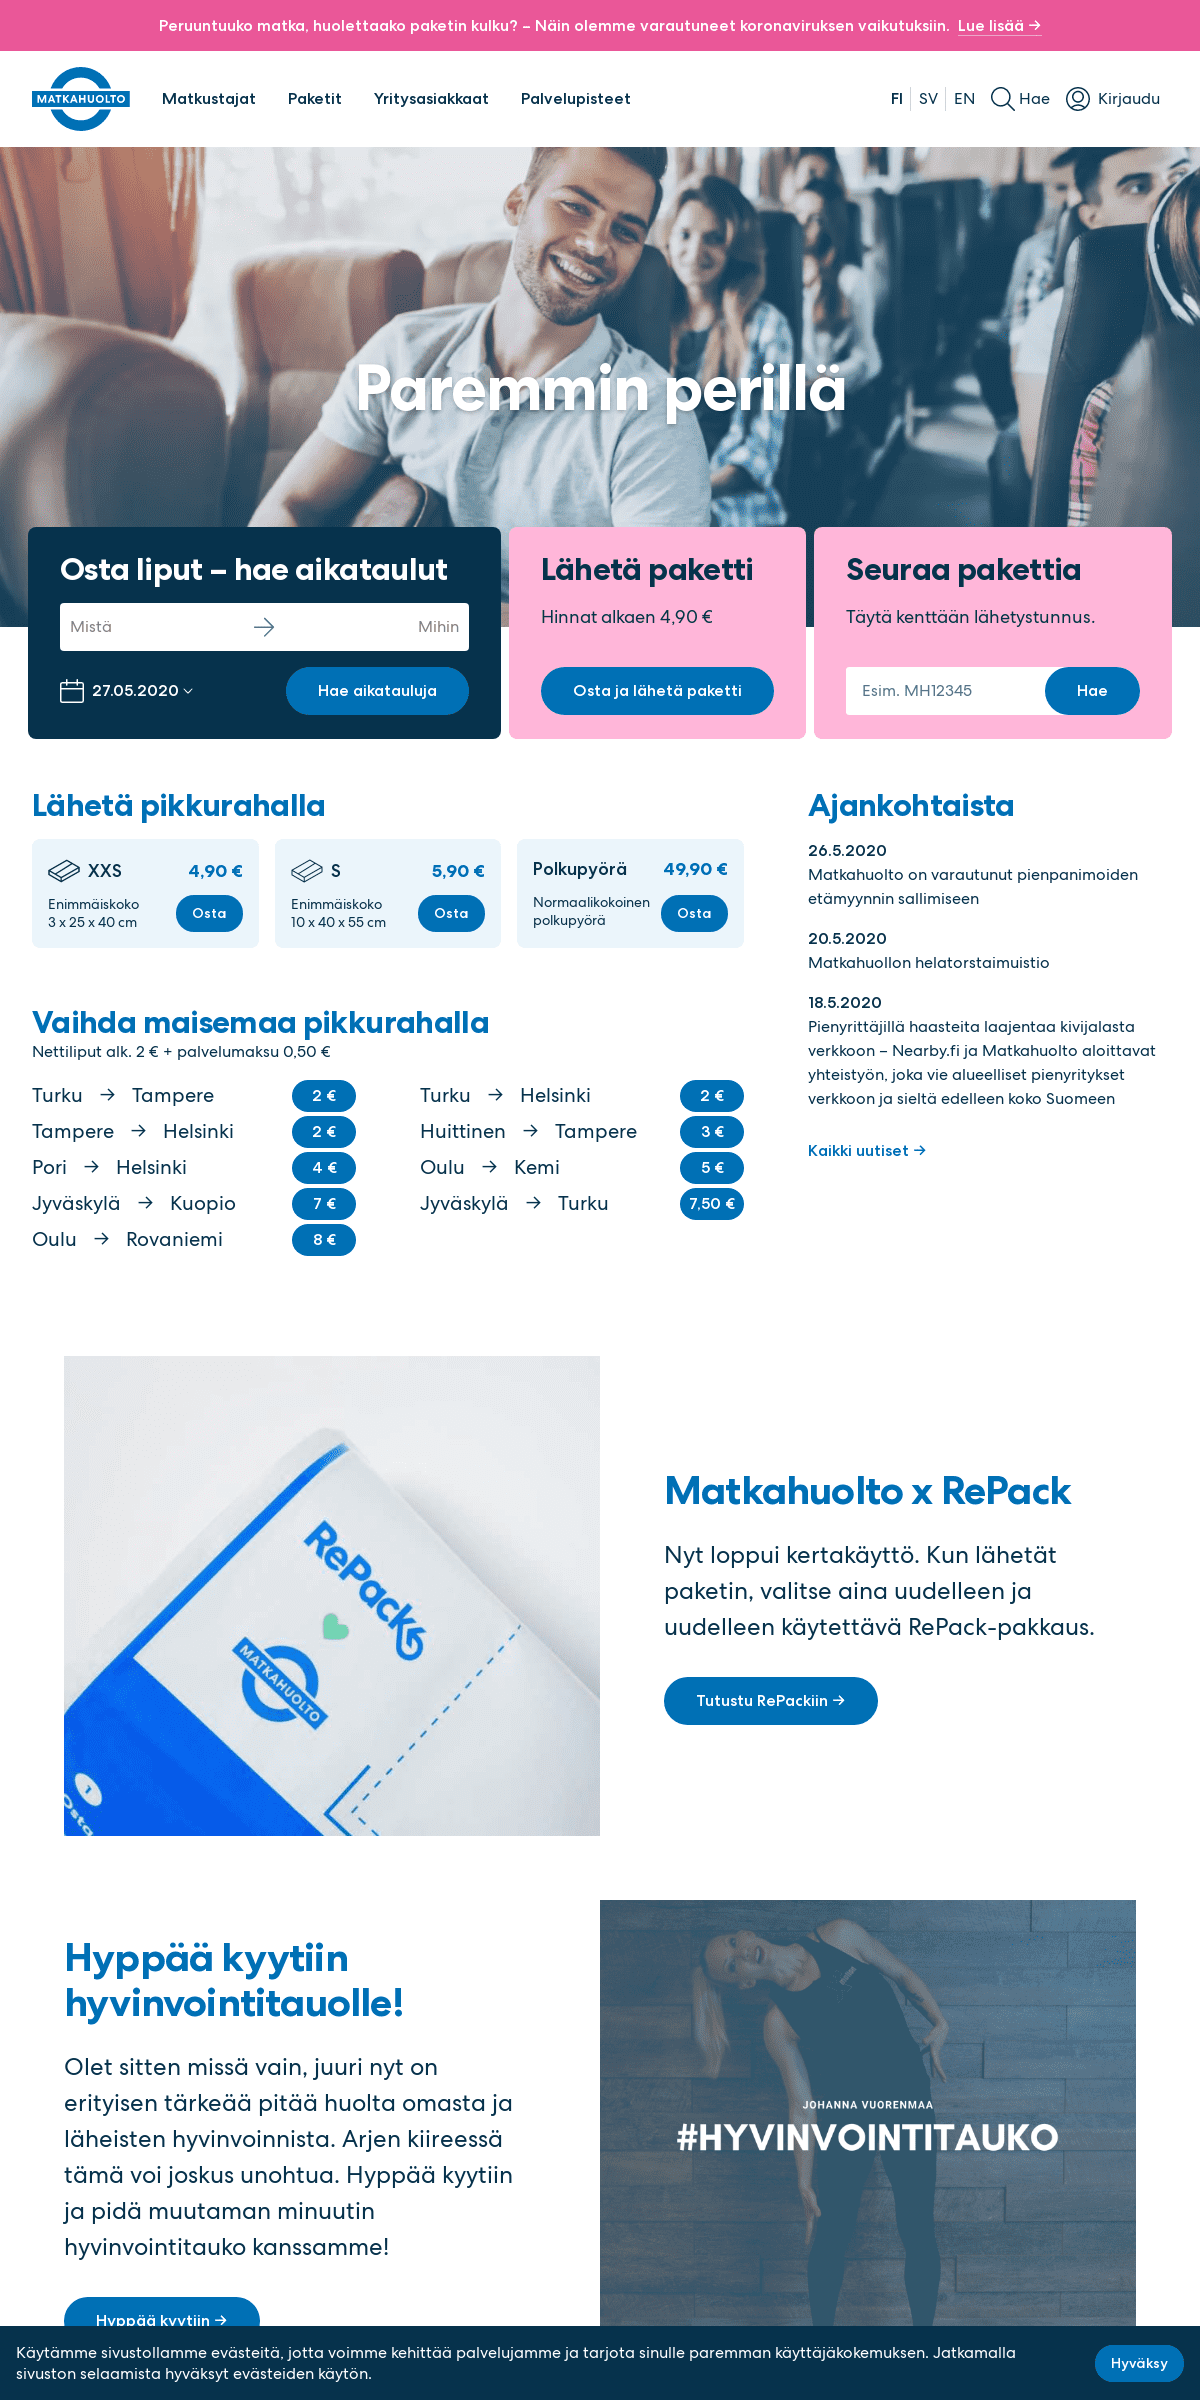 A complete backup of matkahuolto.fi